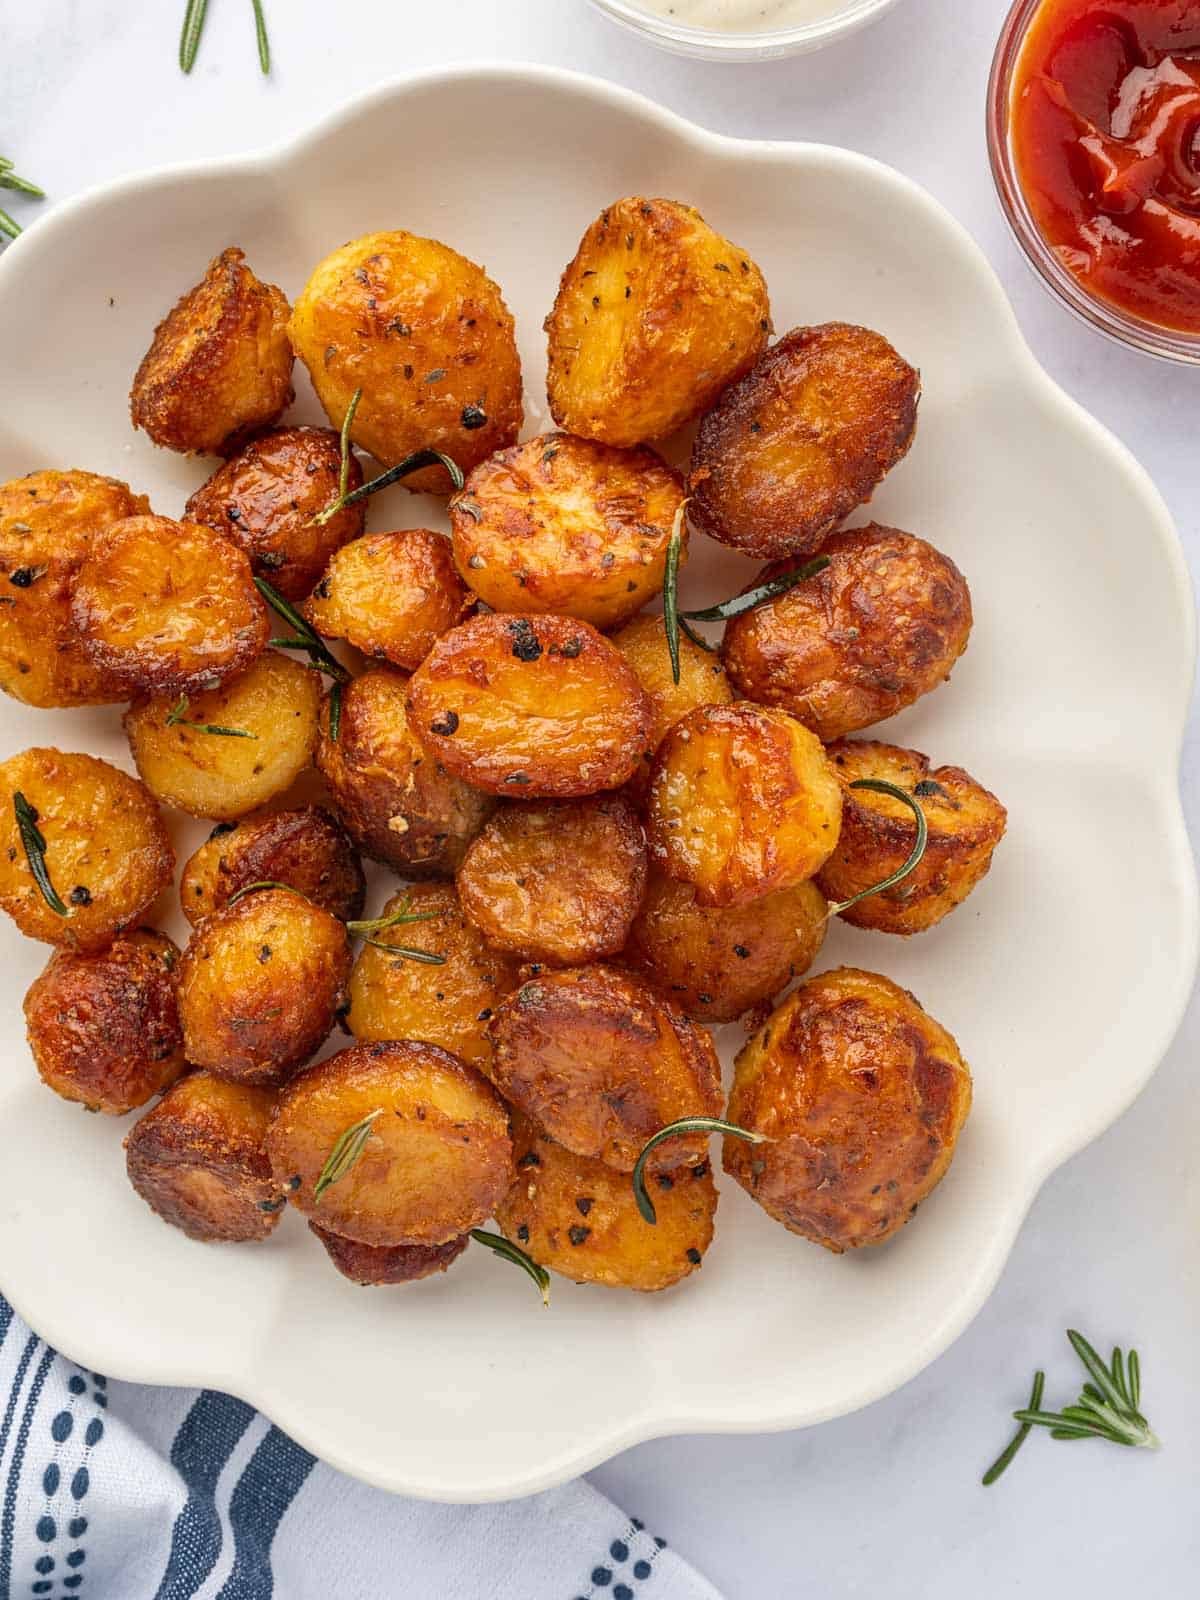 Crunchy, golden baby potatoes are on a white platter.